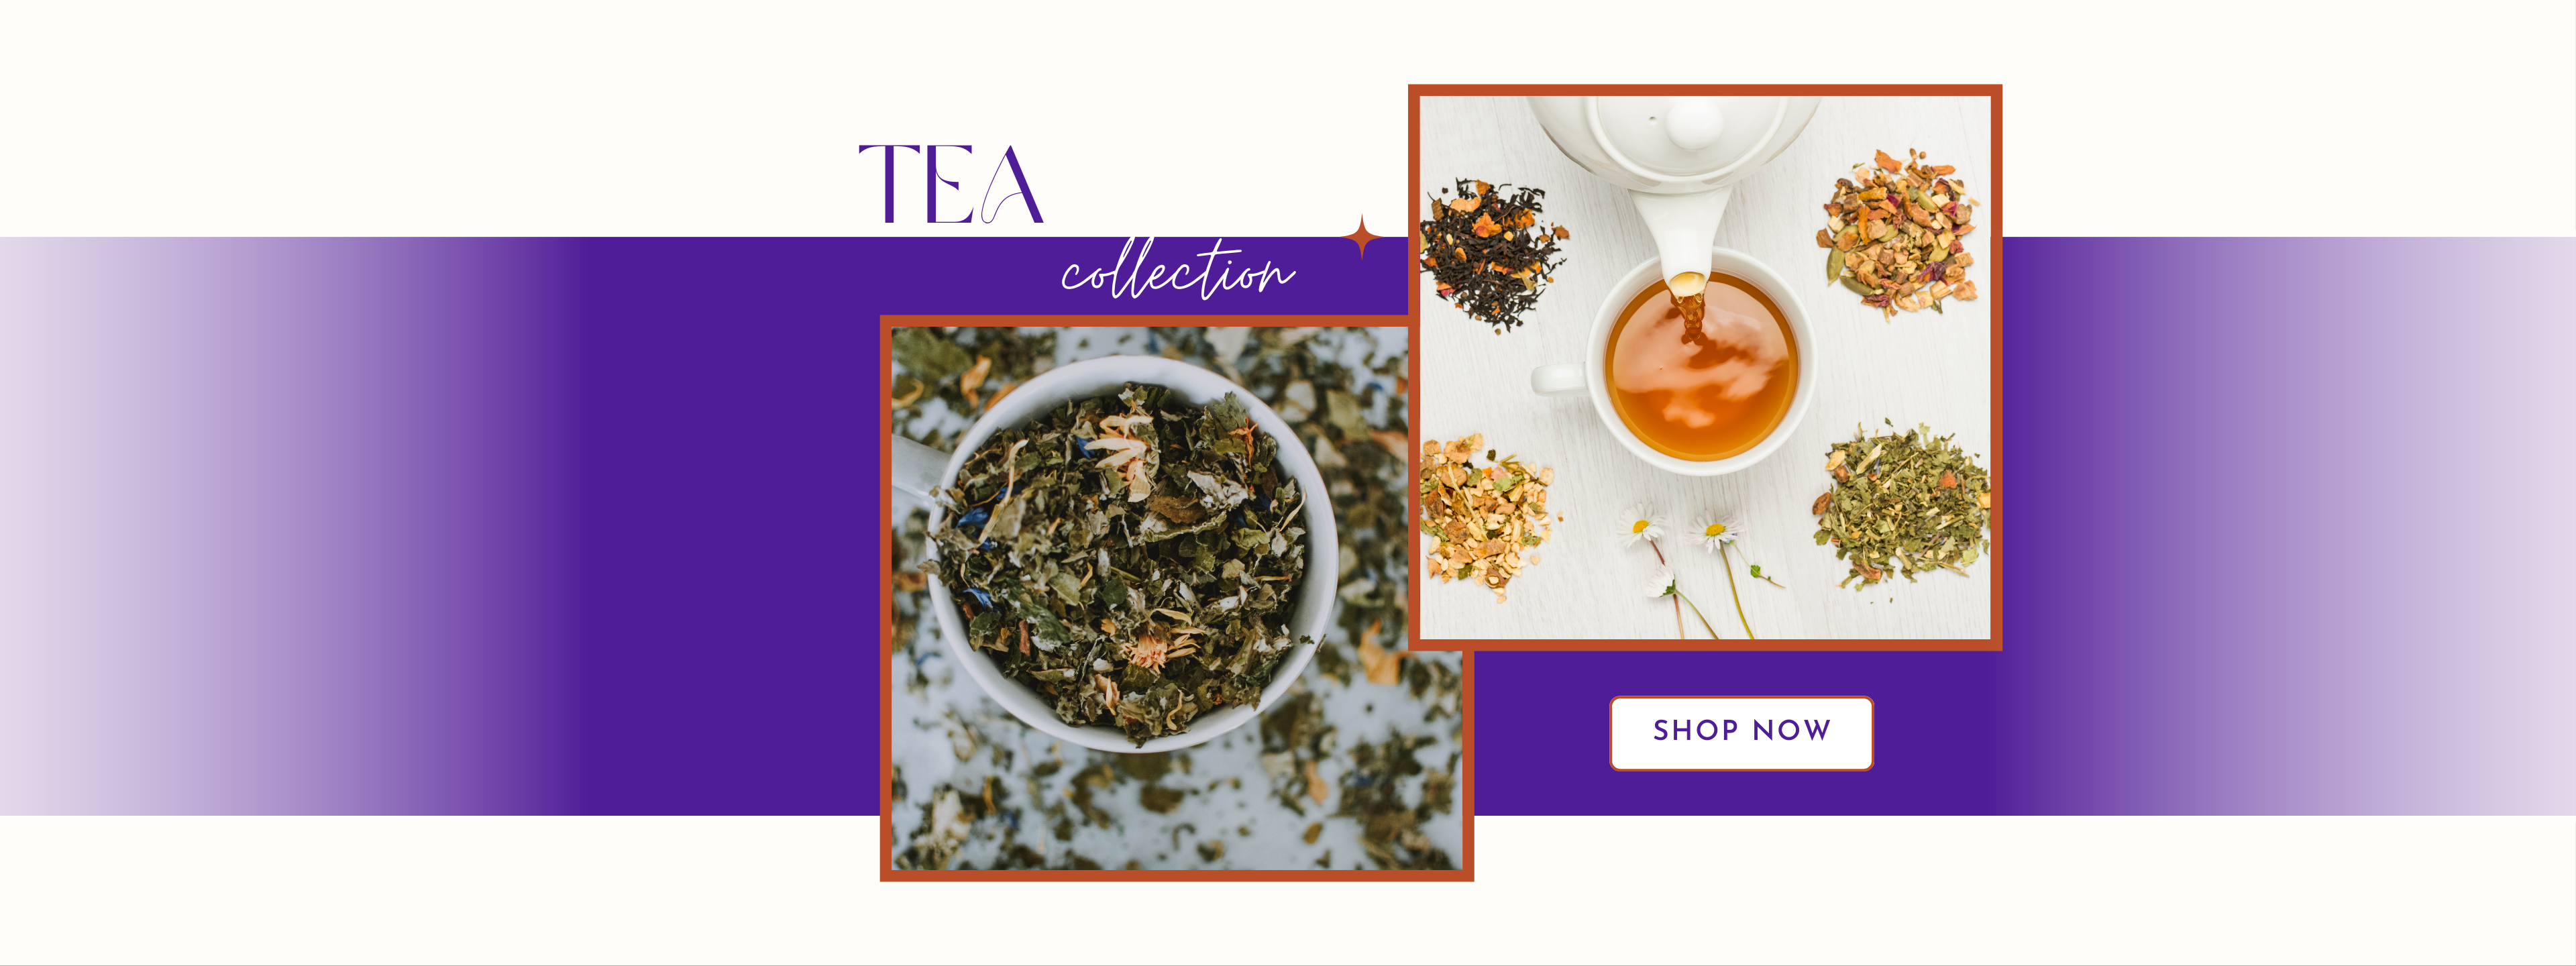 files/Tea_Collection_banner.png